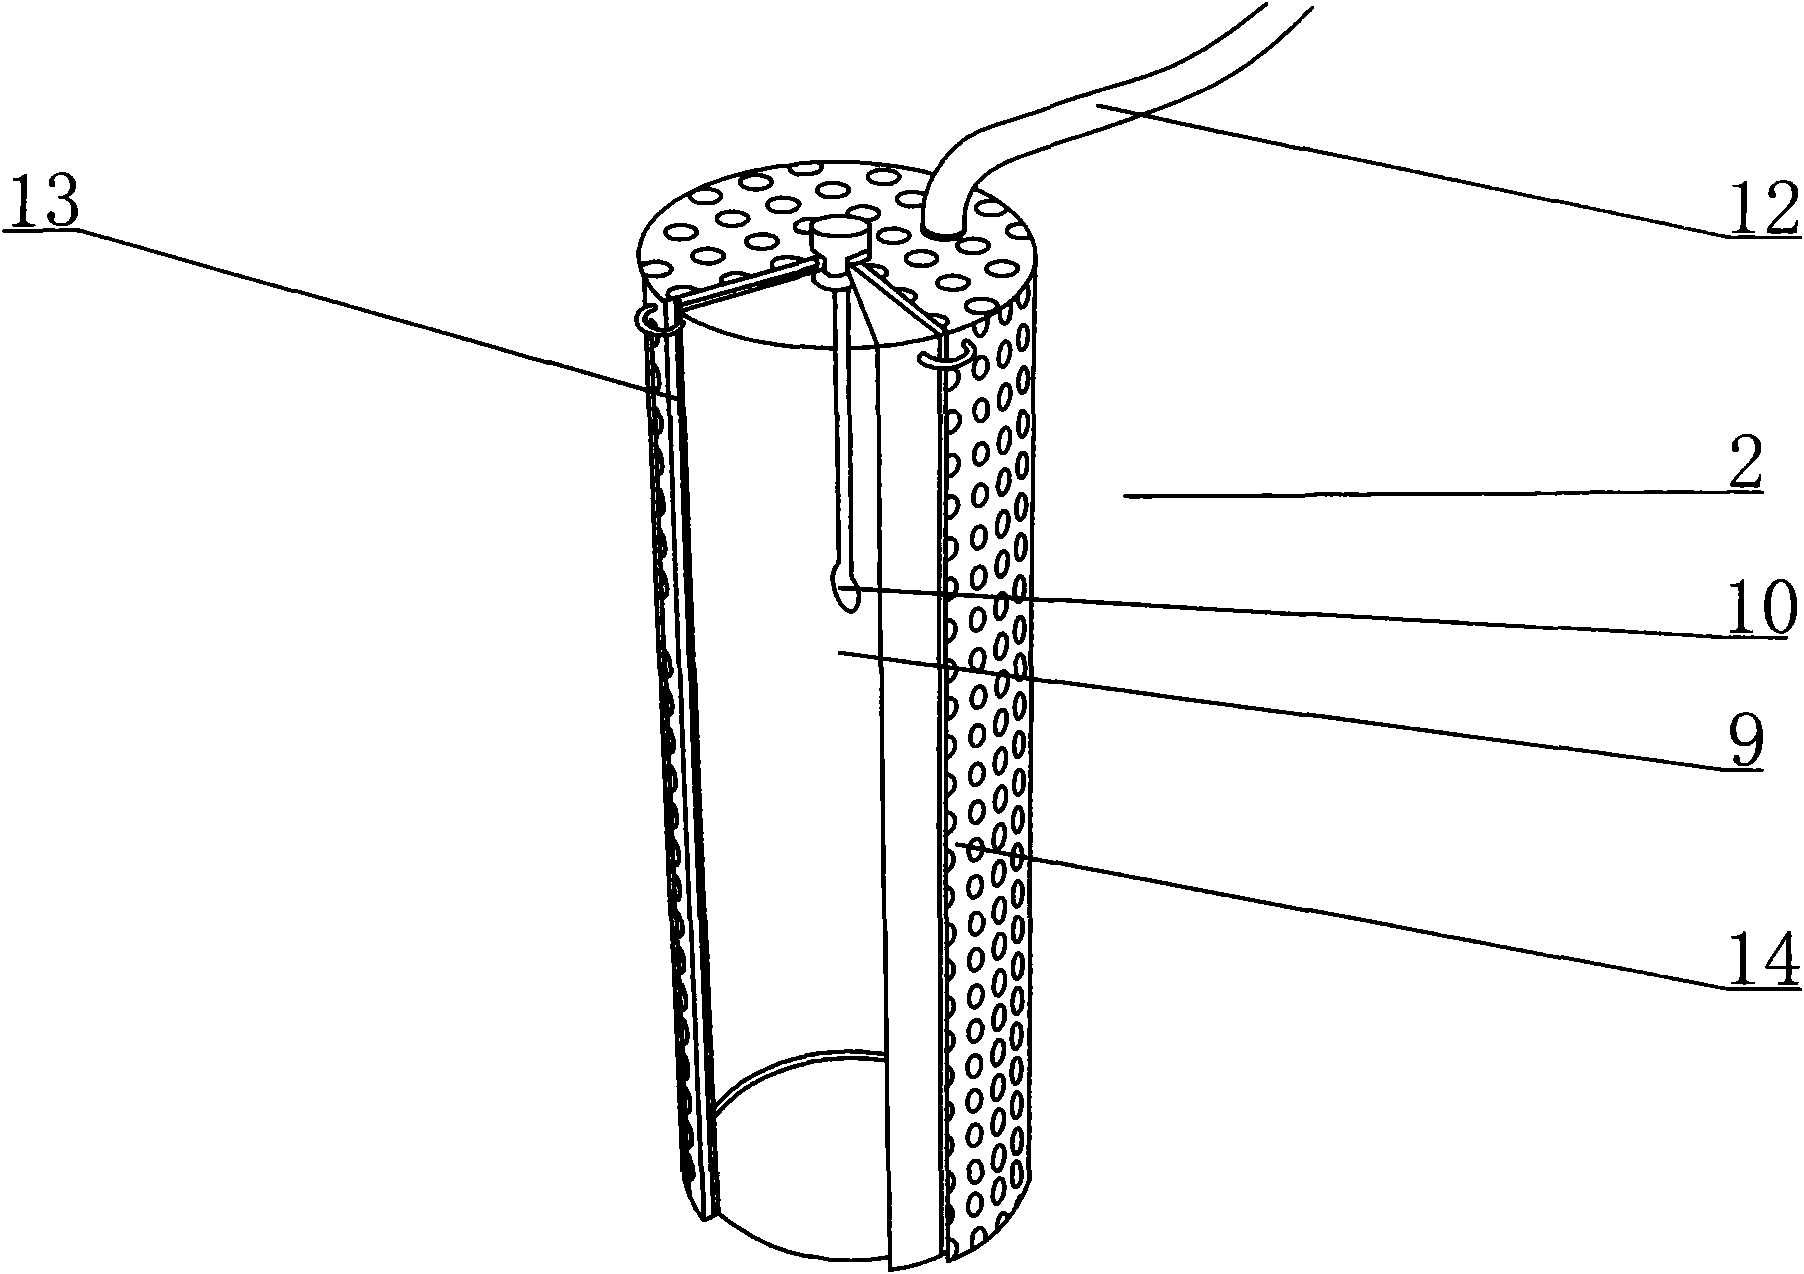 Device and realization method capable of efficiently recycling aquiculture